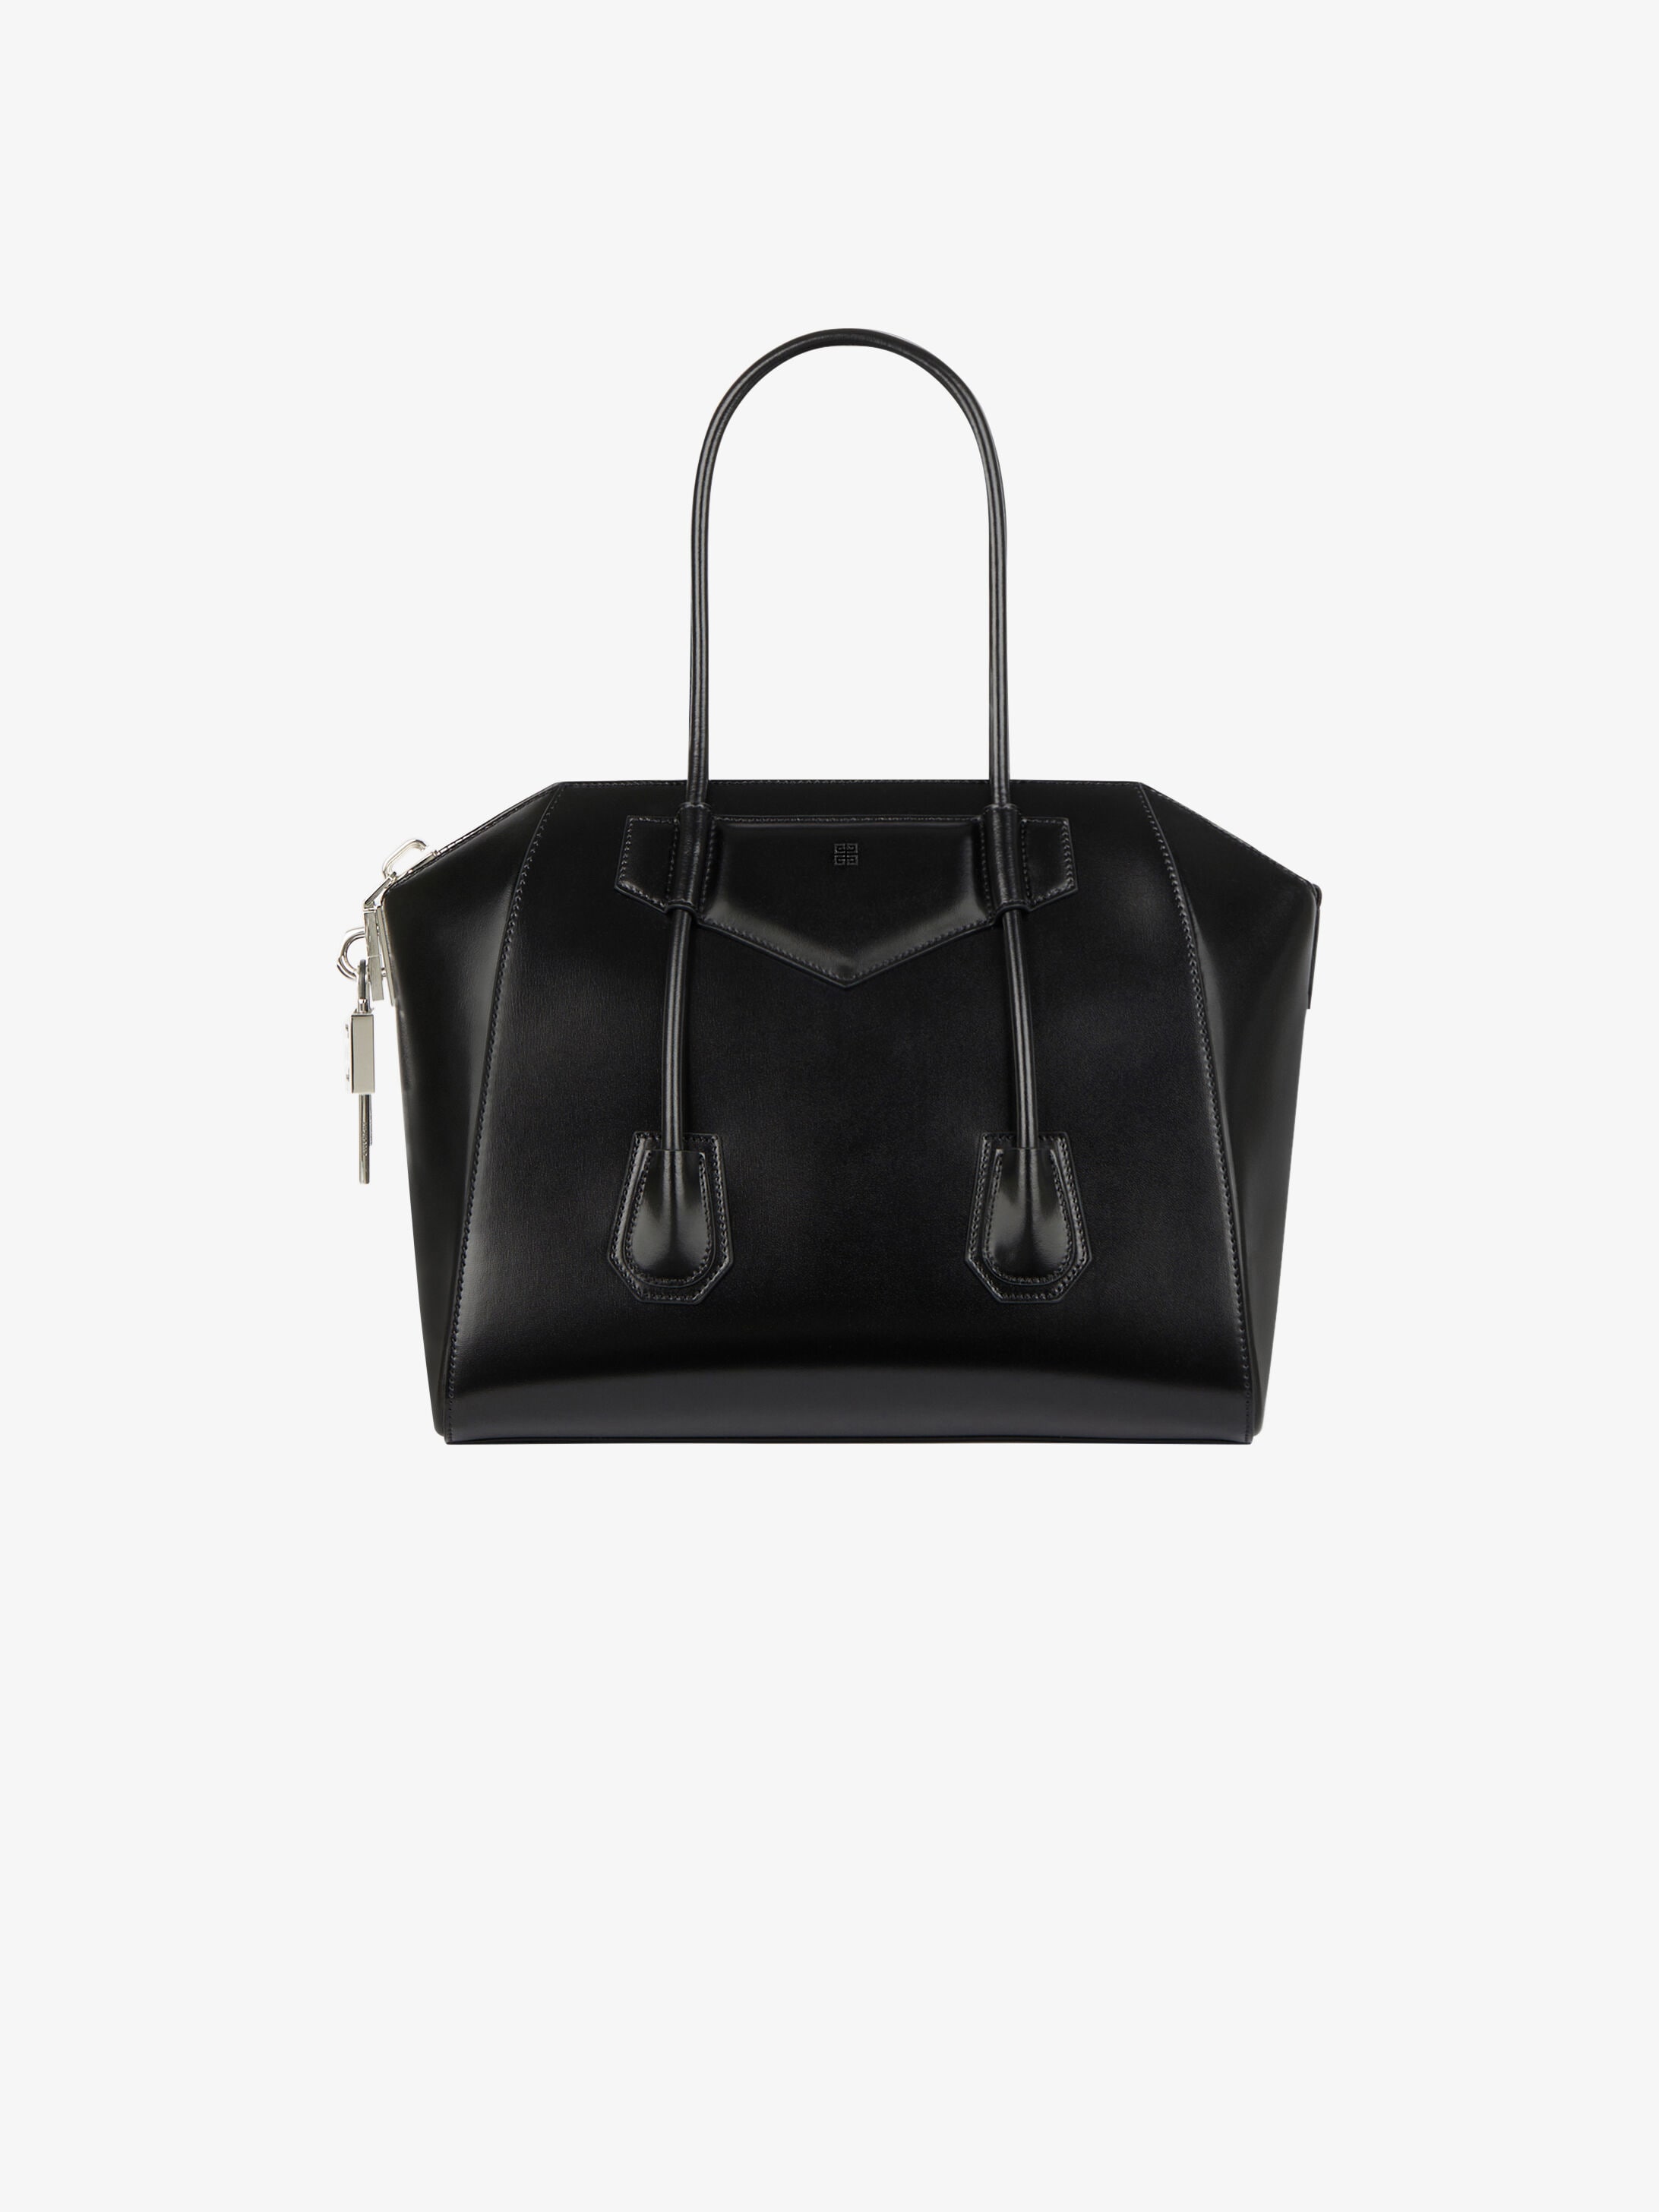 Bags Givenchy for Women | GIVENCHY Paris | GIVENCHY Paris